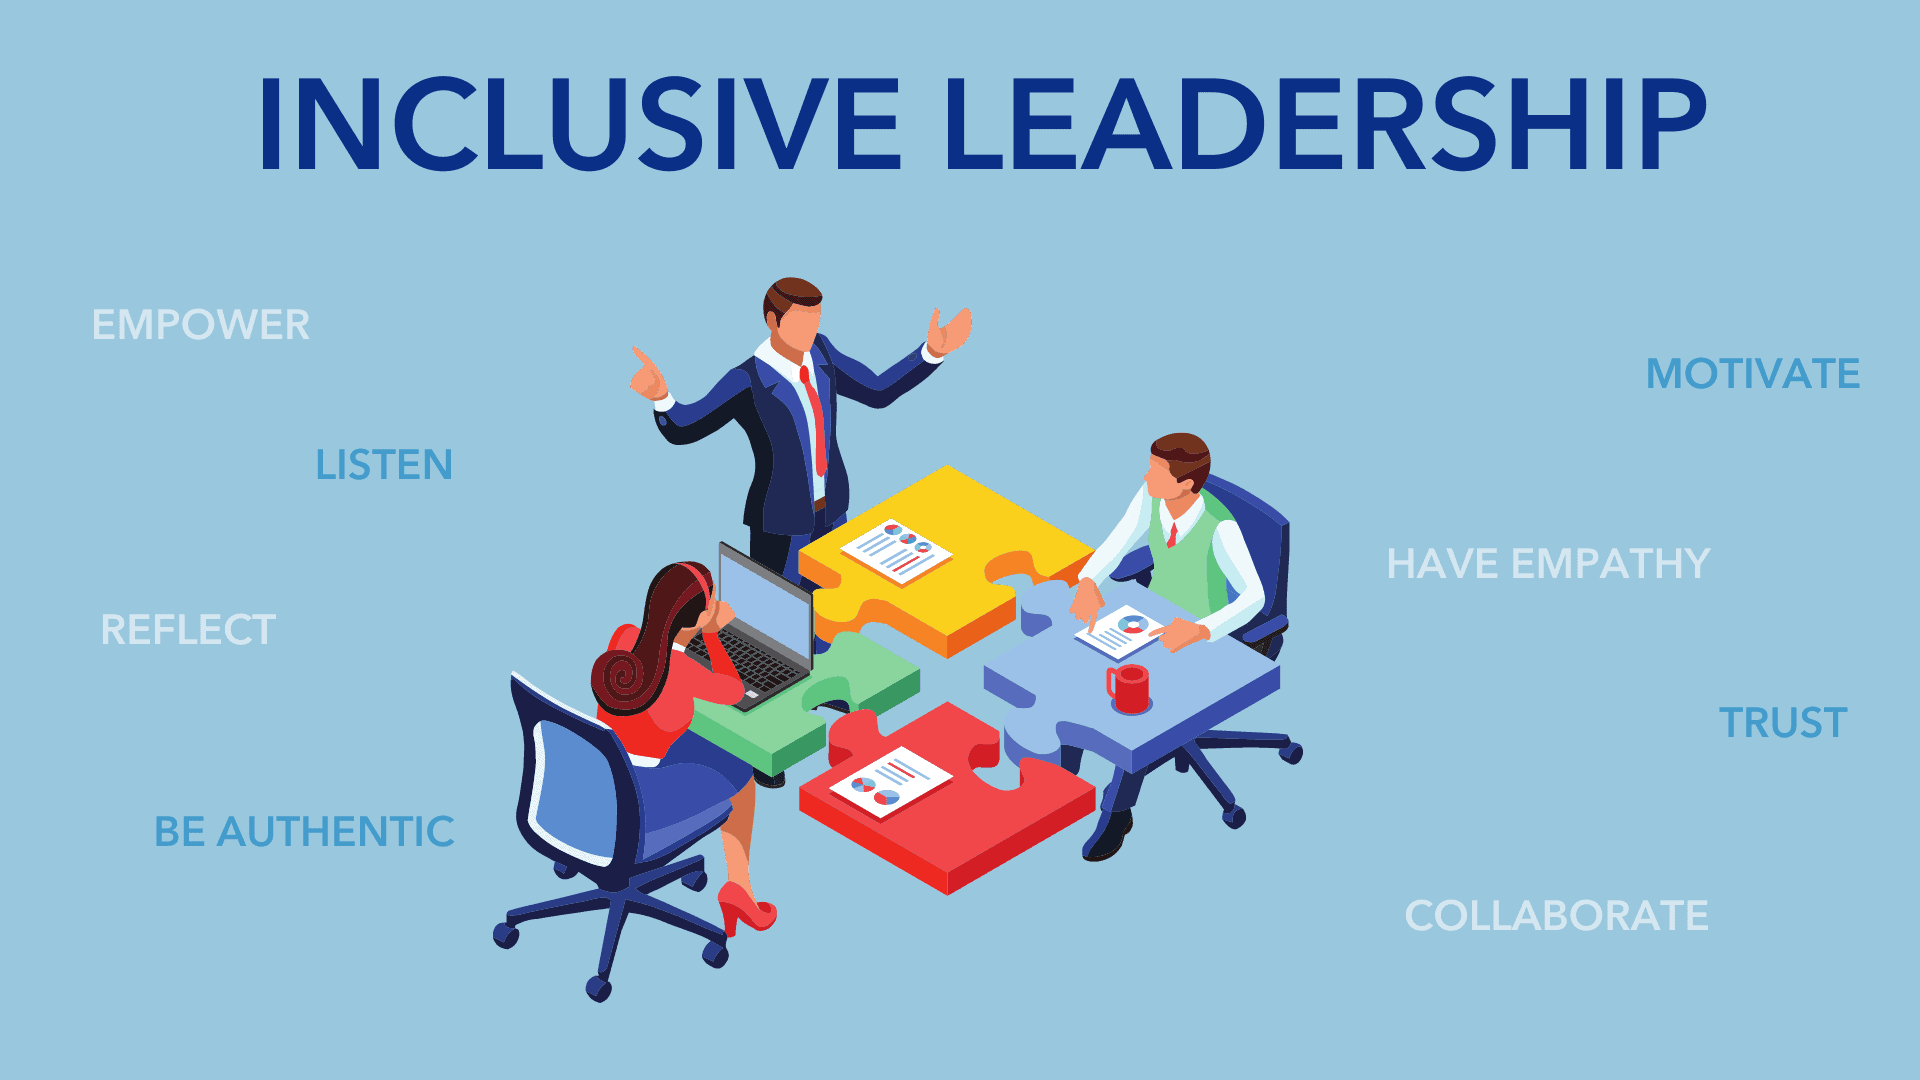 Two people are sitting at desks in the shape of puzzle pieces. Another person is standing with his arms raised. The words Inclusive Leadership are across the top, with a range of other words describing attributes of an inclusive leader around the image